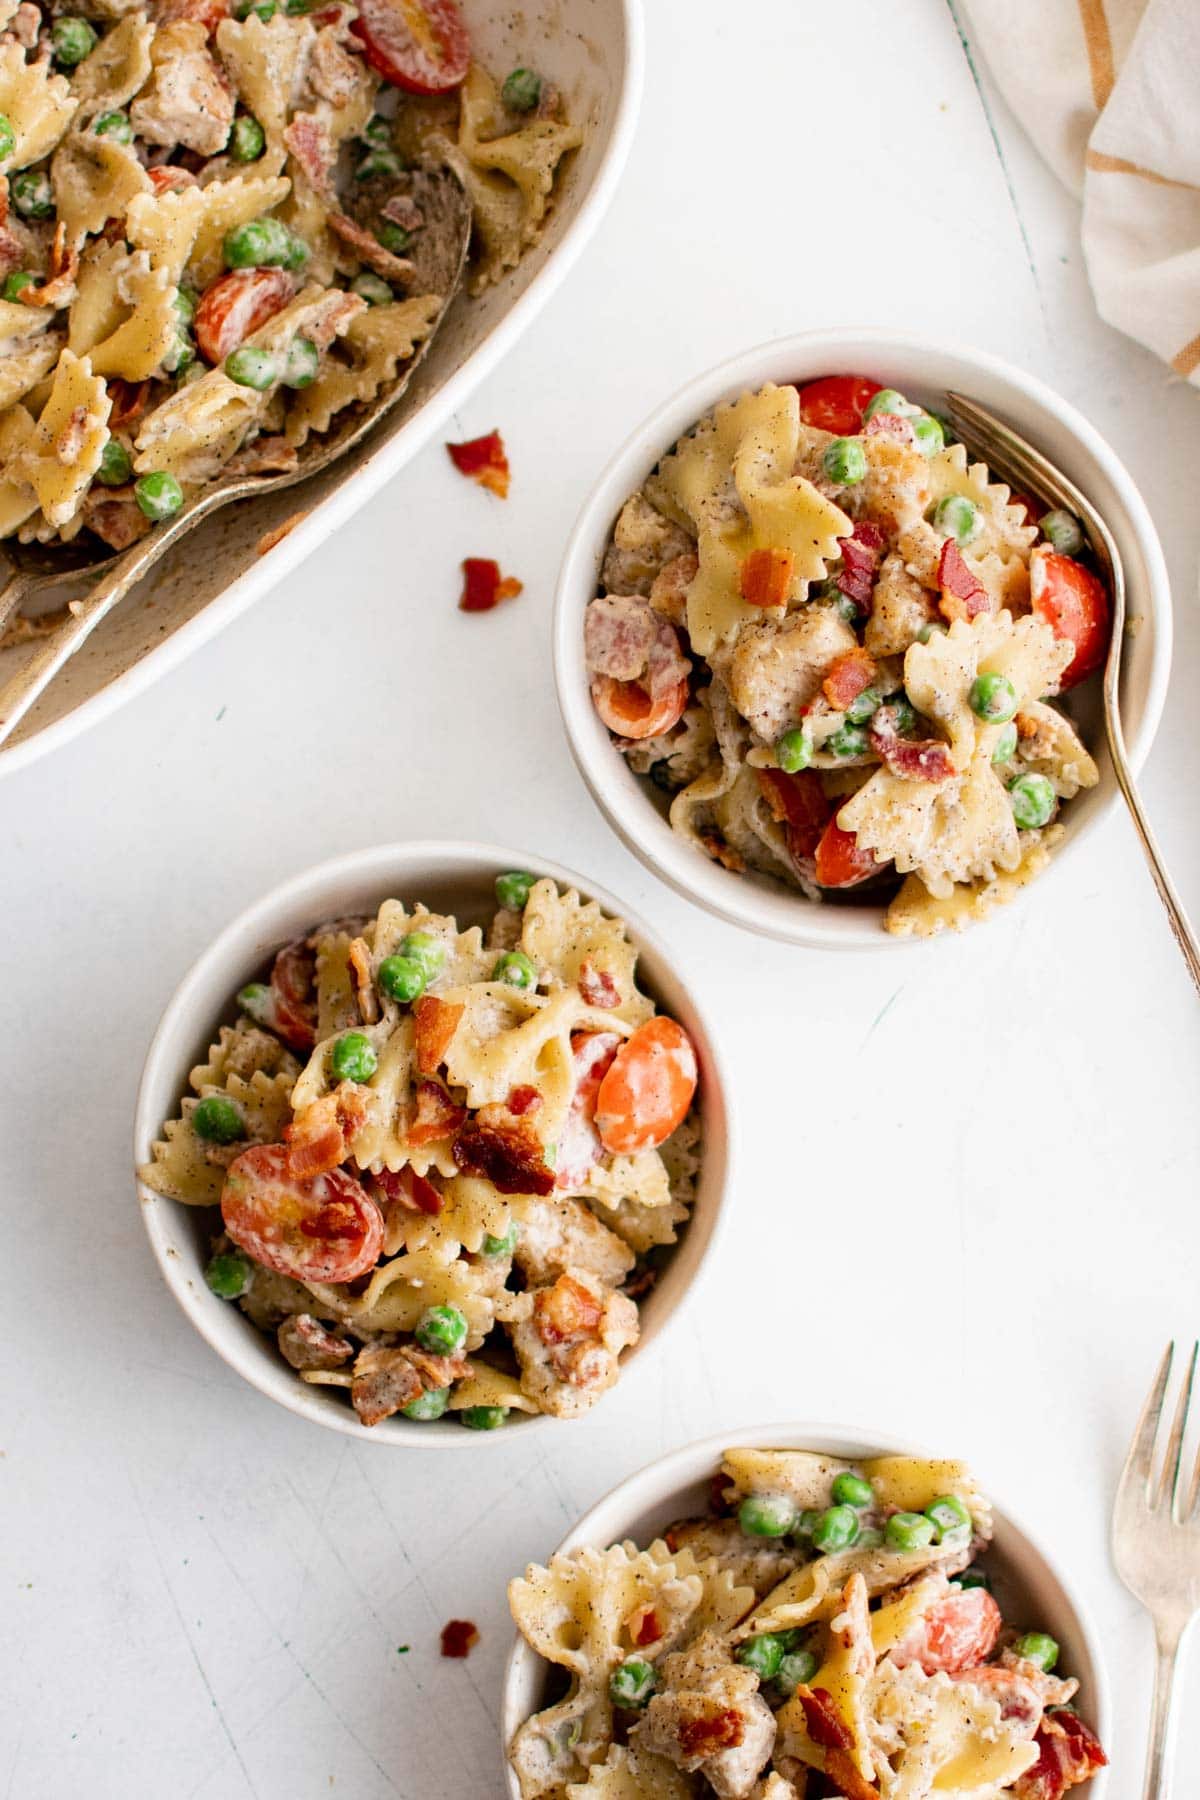 Bowls of chicken pasta salad with peas and tomatoes.